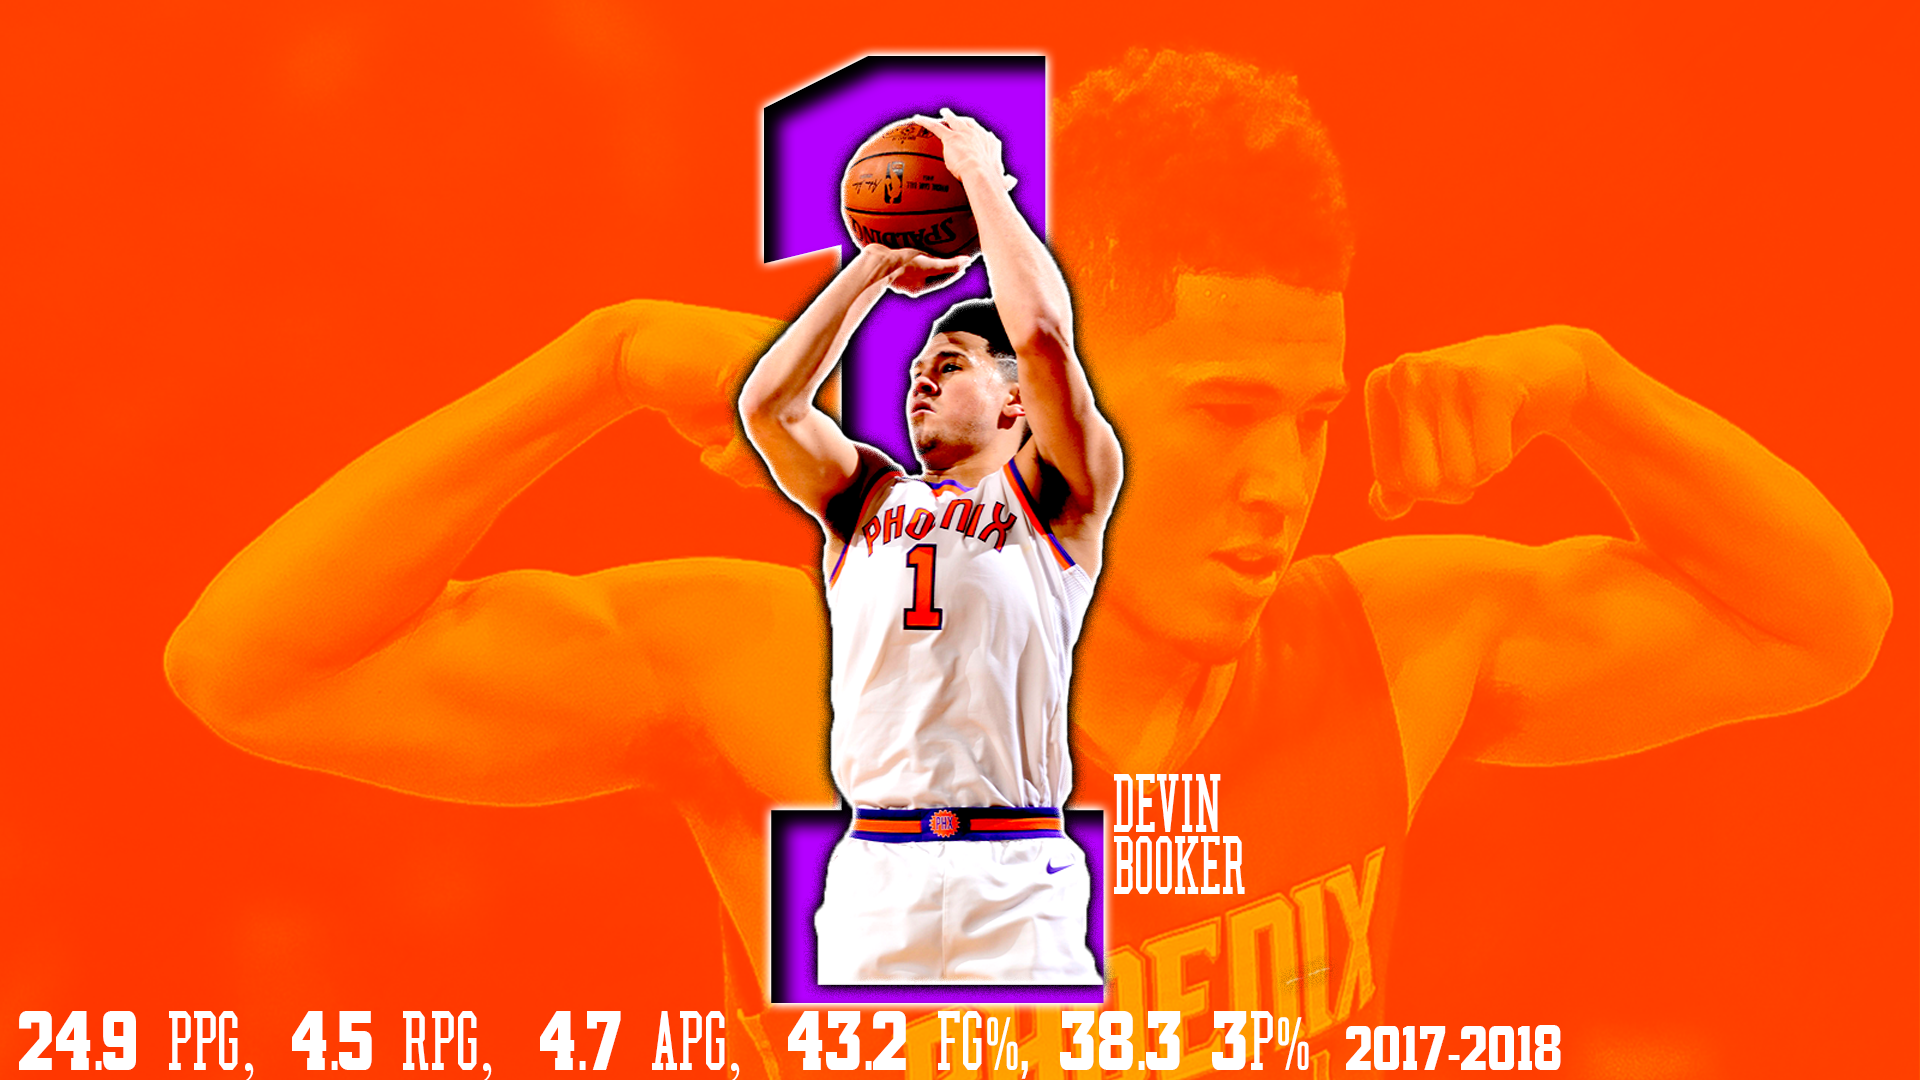 Devin Booker Phoenix Suns fans are on this revenge tour with us